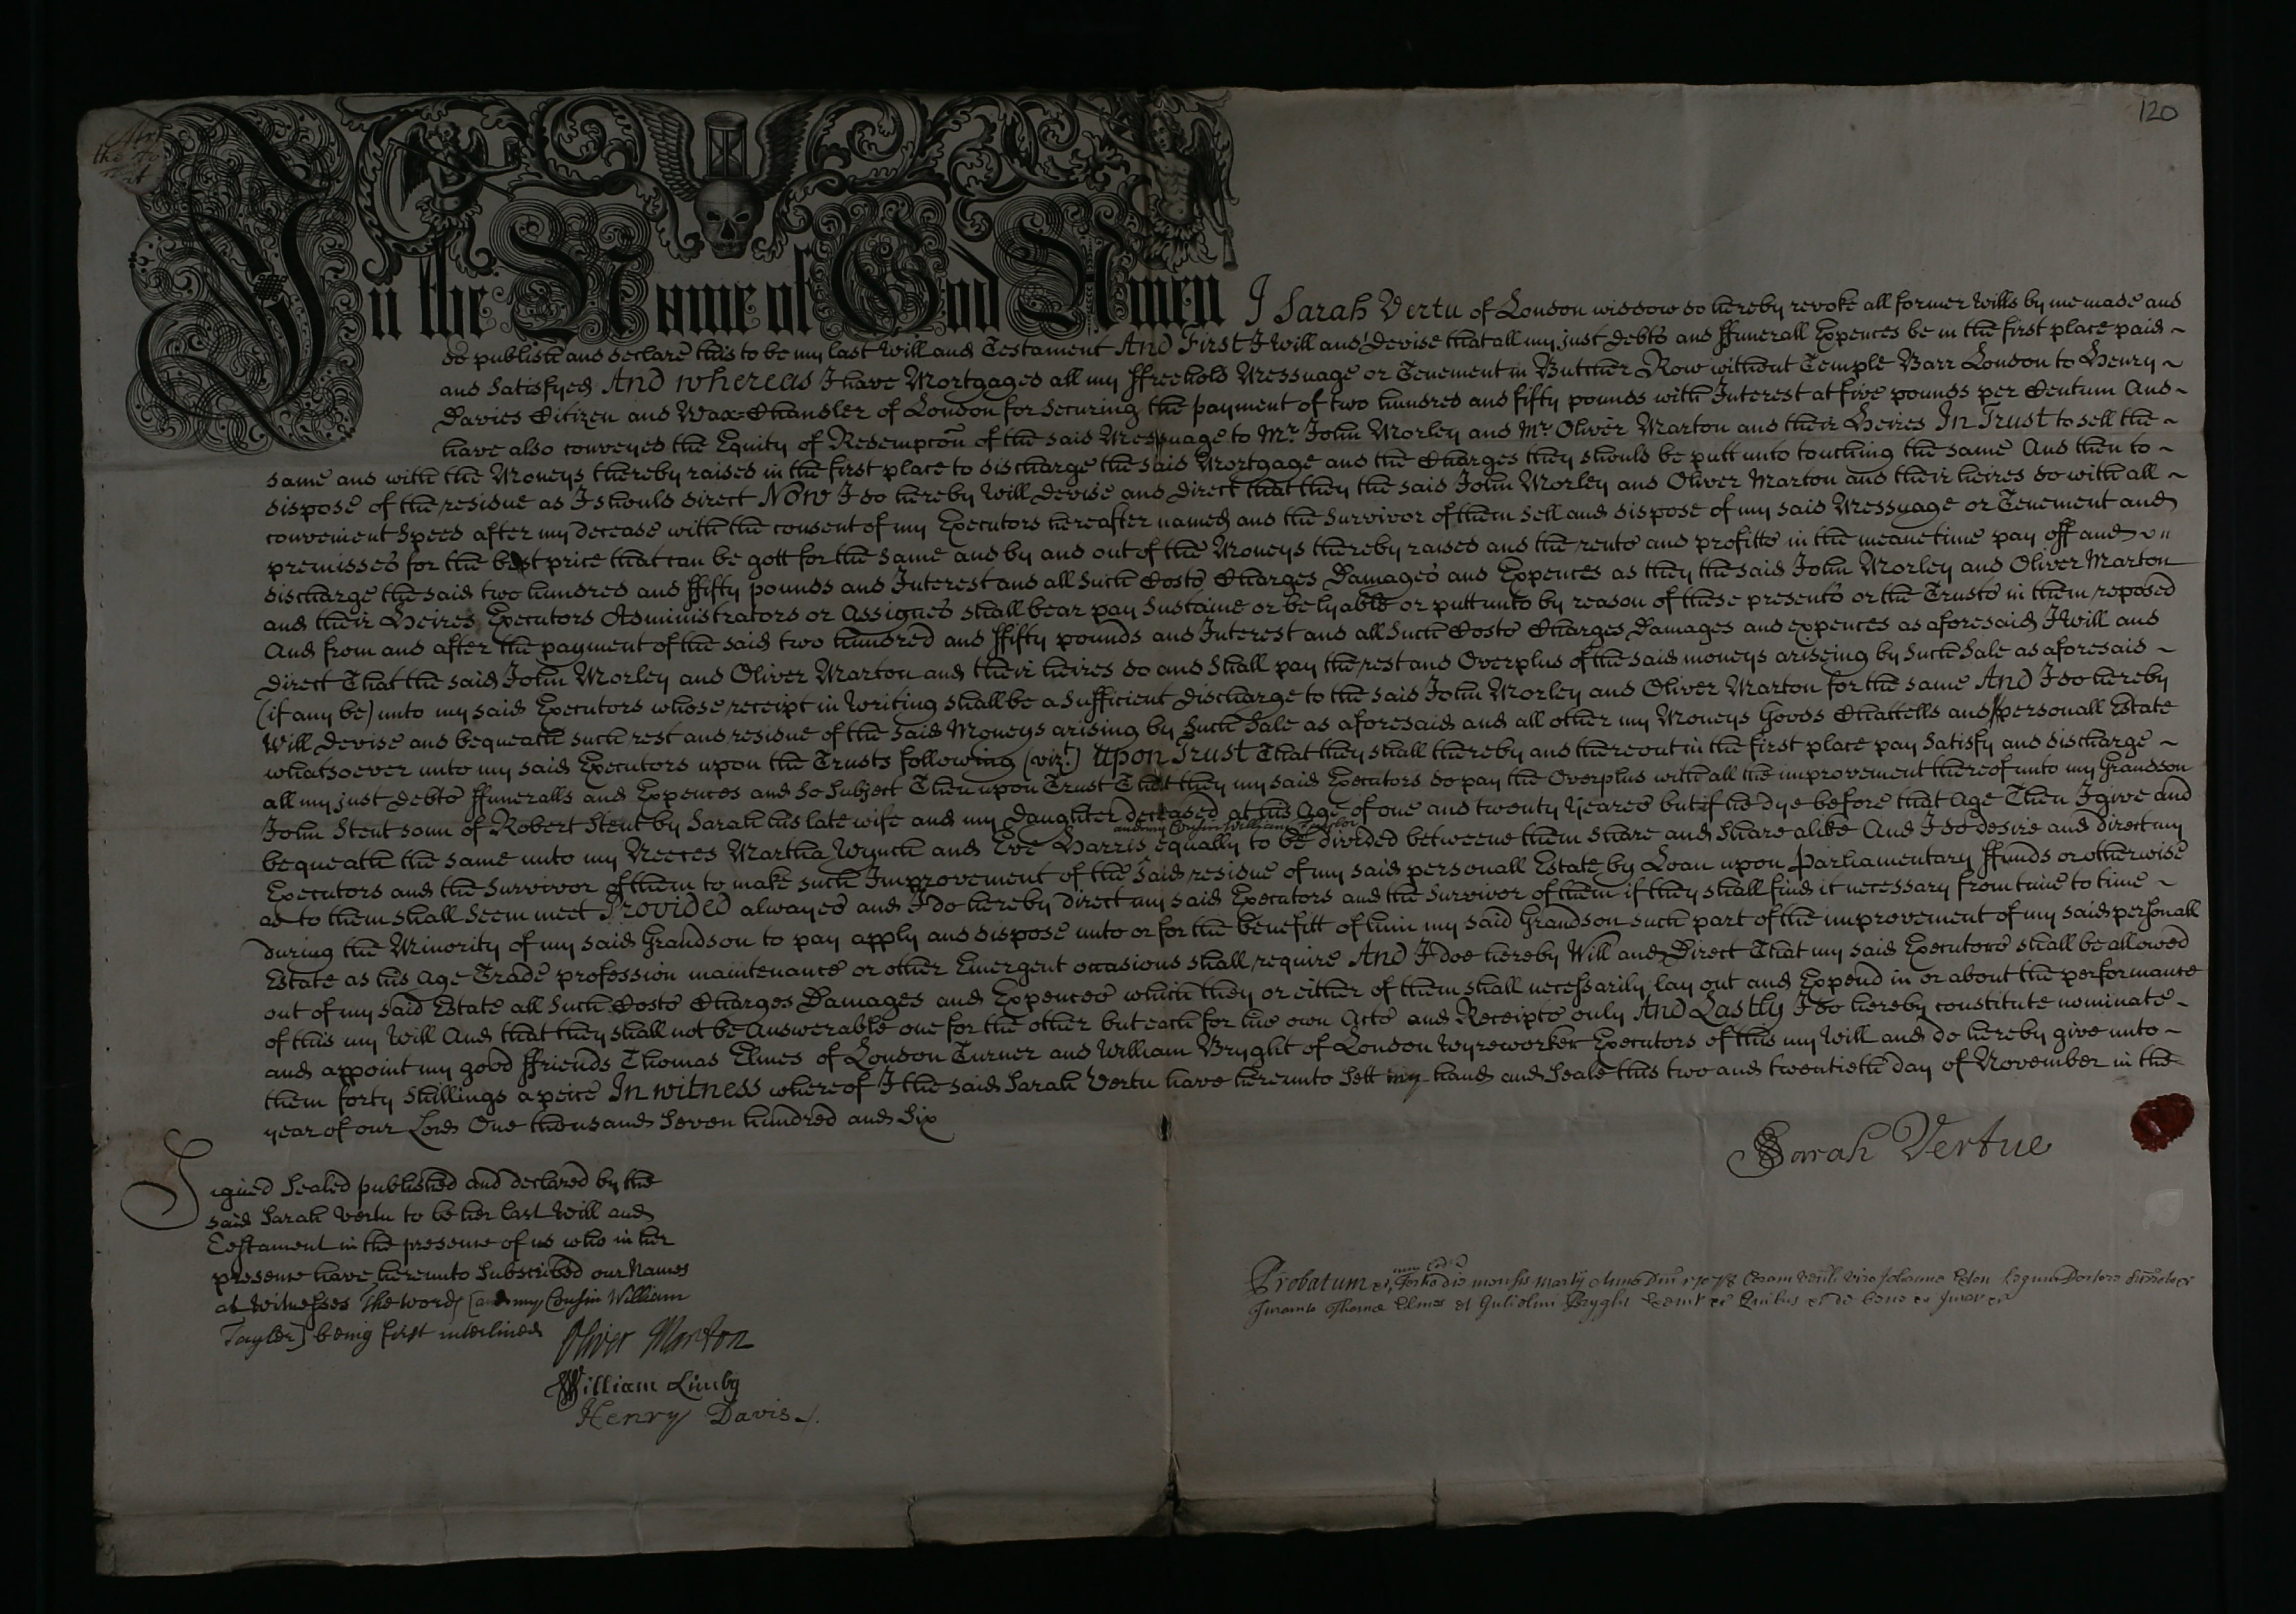 The will of Sarah Vertu in 1708 - was she related?